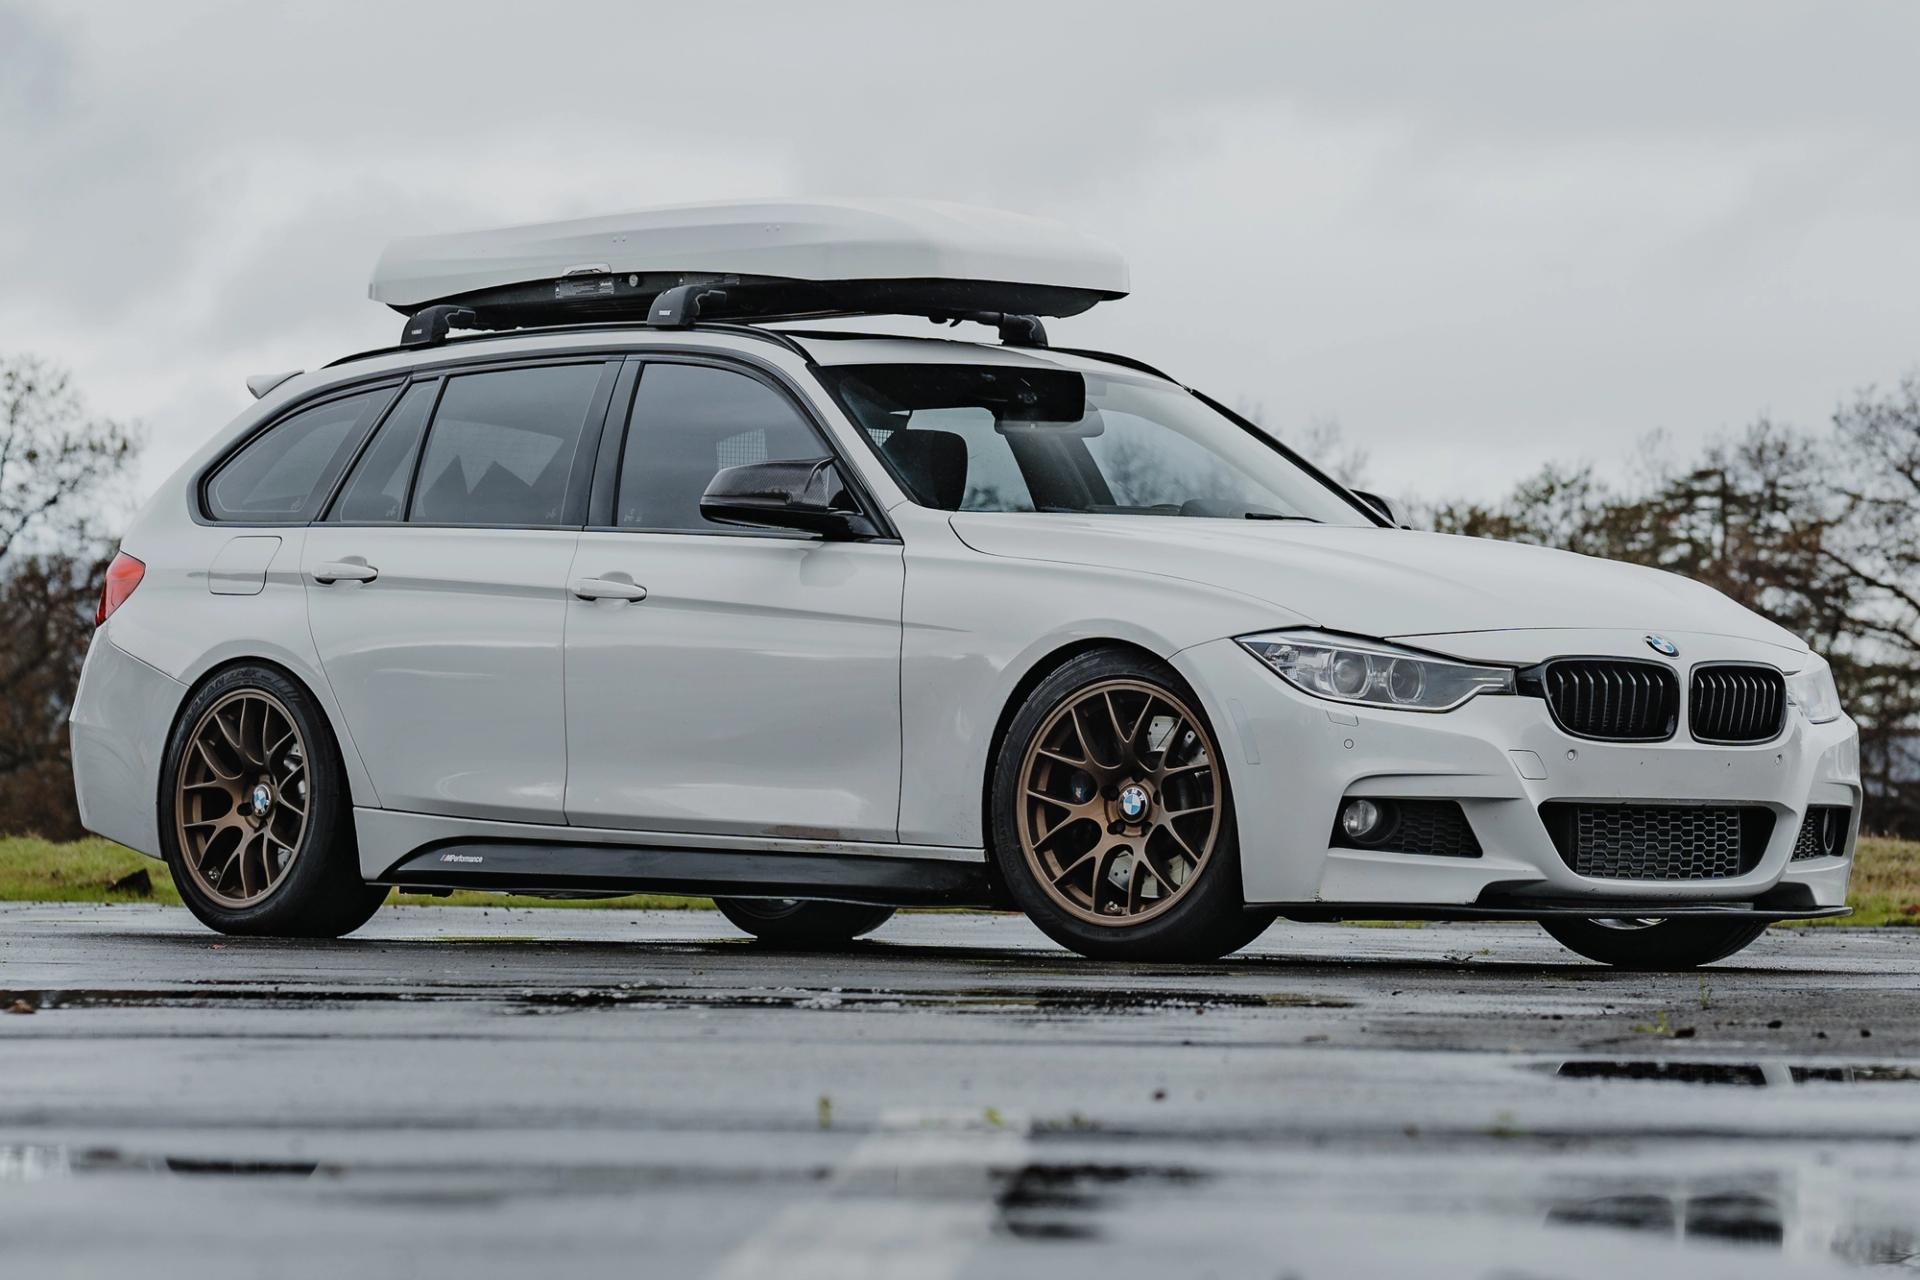 BMW F31 Wagon 3 Series with 18" EC-7 in Satin Bronze